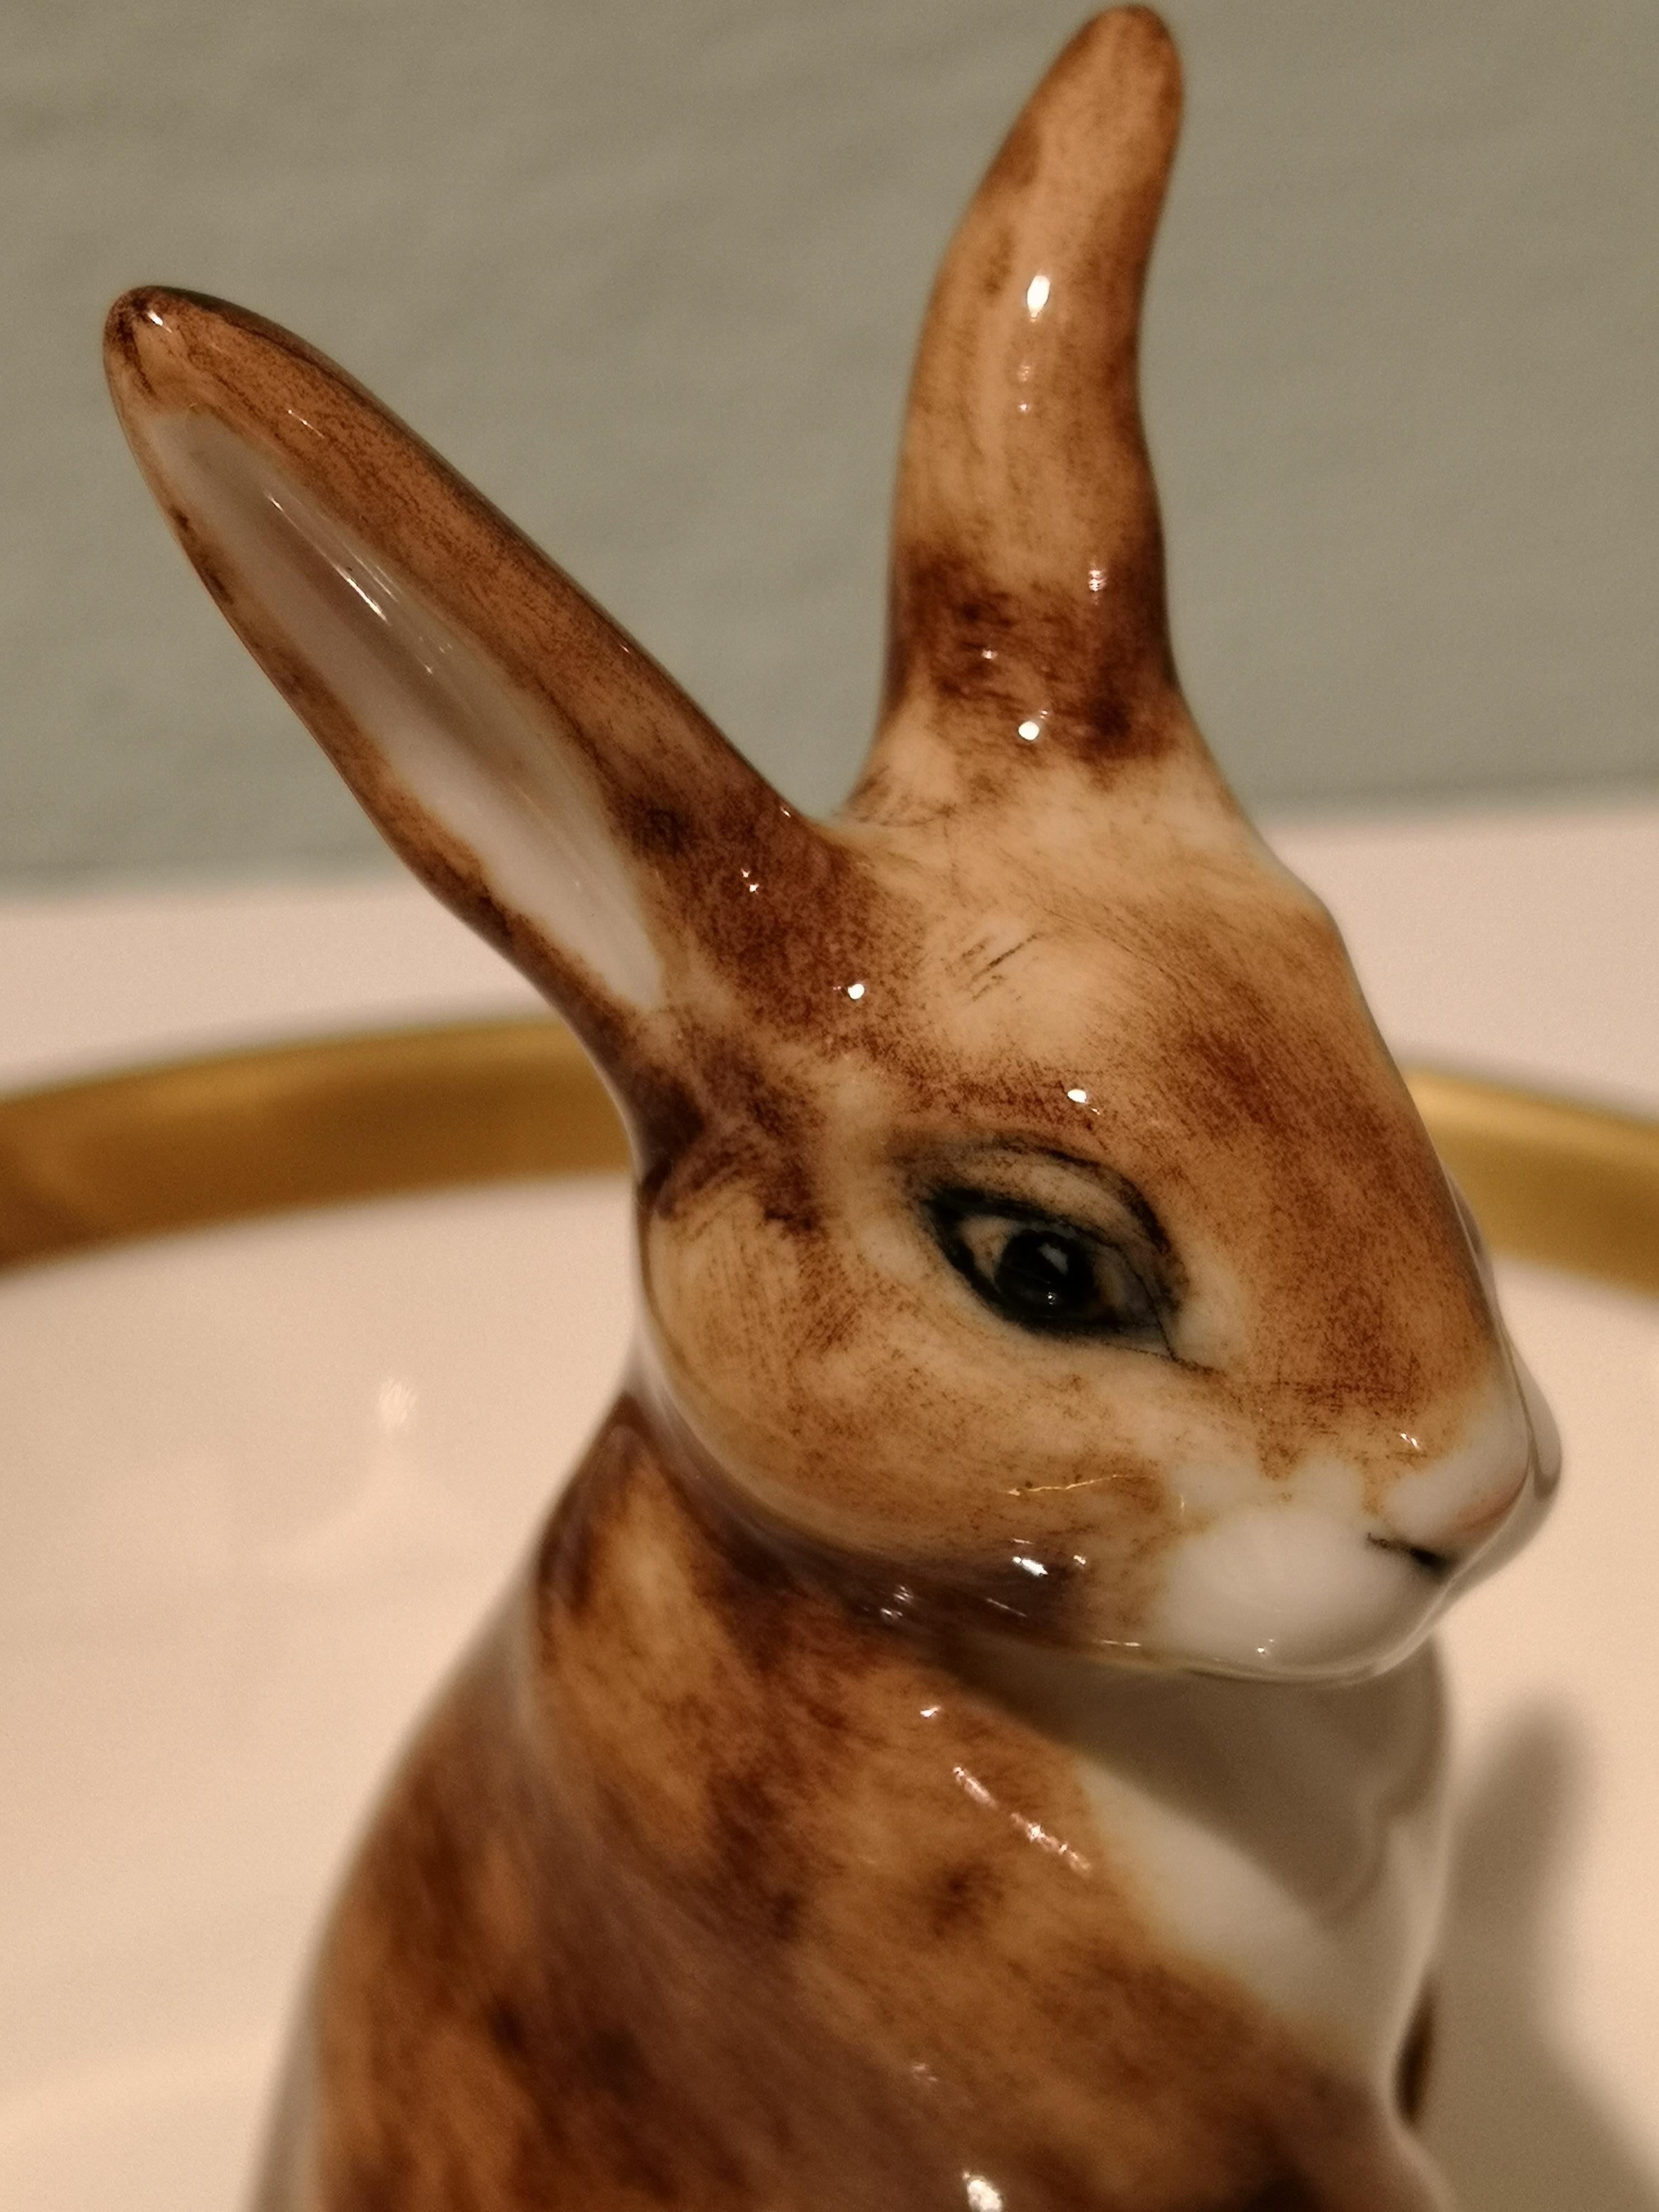 Entirely handmade porcelain bowl with a hands-free naturalistic formed Easter rabbit in brown and white colors. The rabbit is sitting in the middle of the bowl for decorating nuts or sweets around the figure. Rimmed with a fine 24-carat gold line.